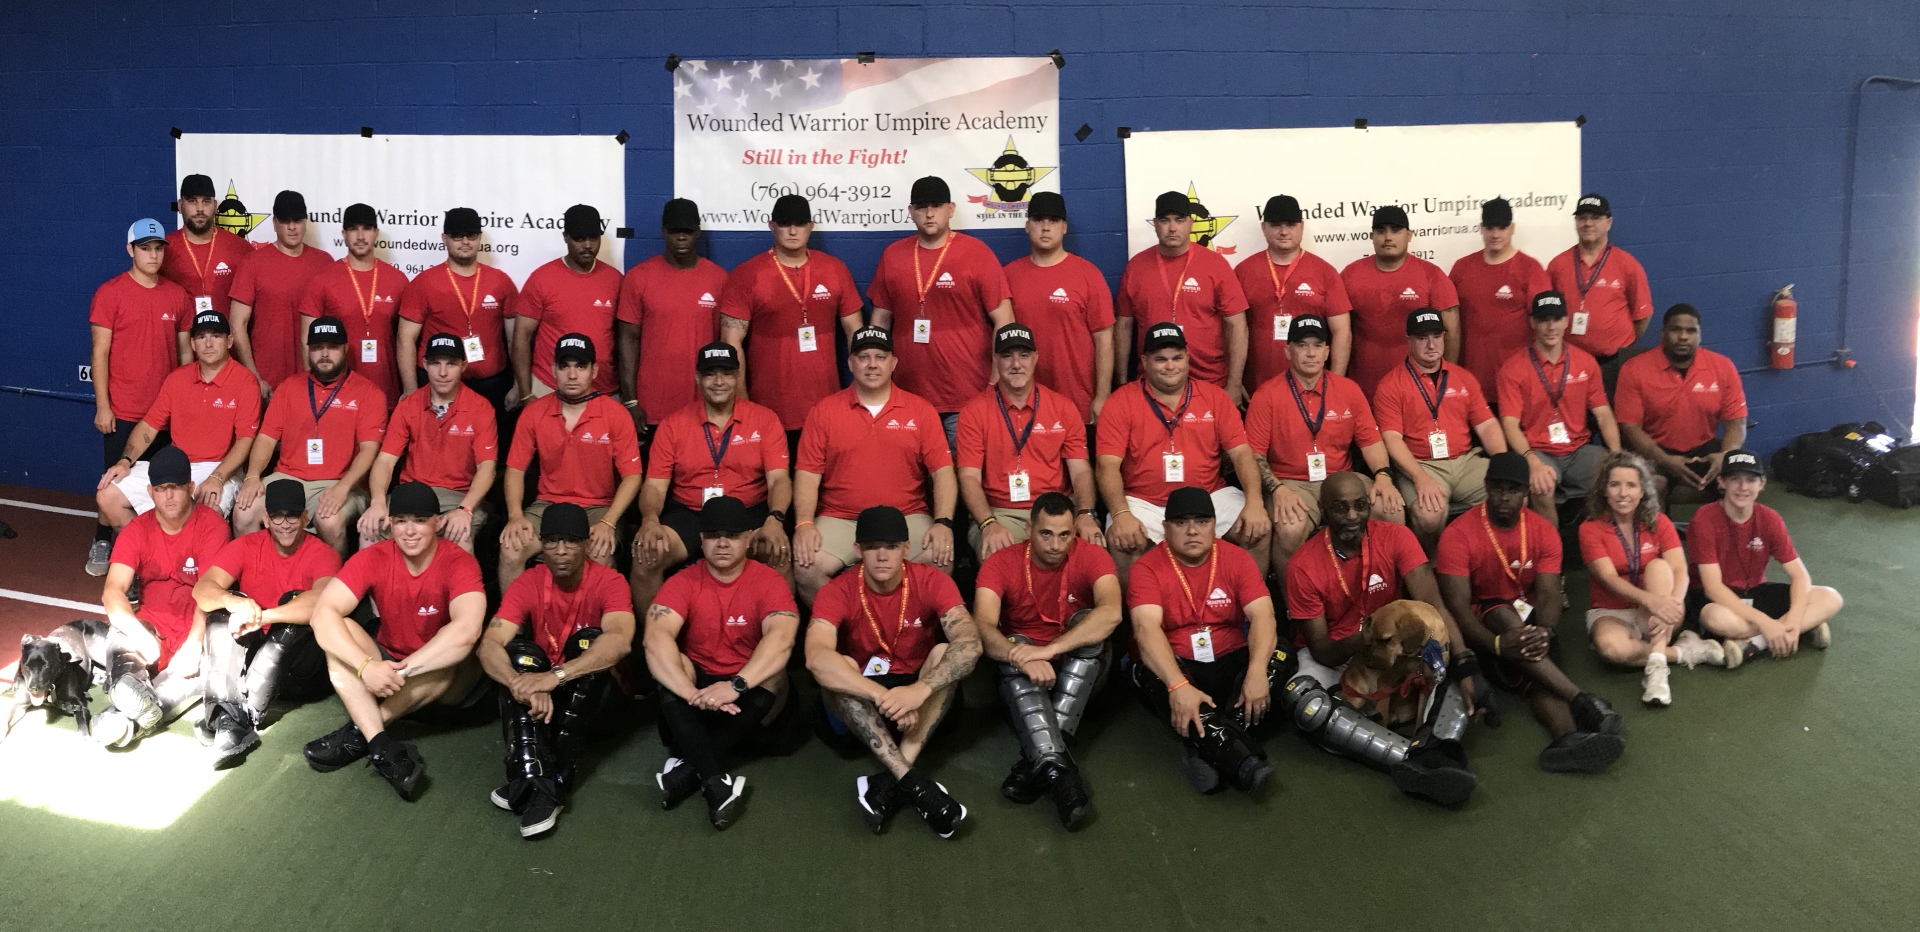 Wounded Warrior Umpire Academy June 2018